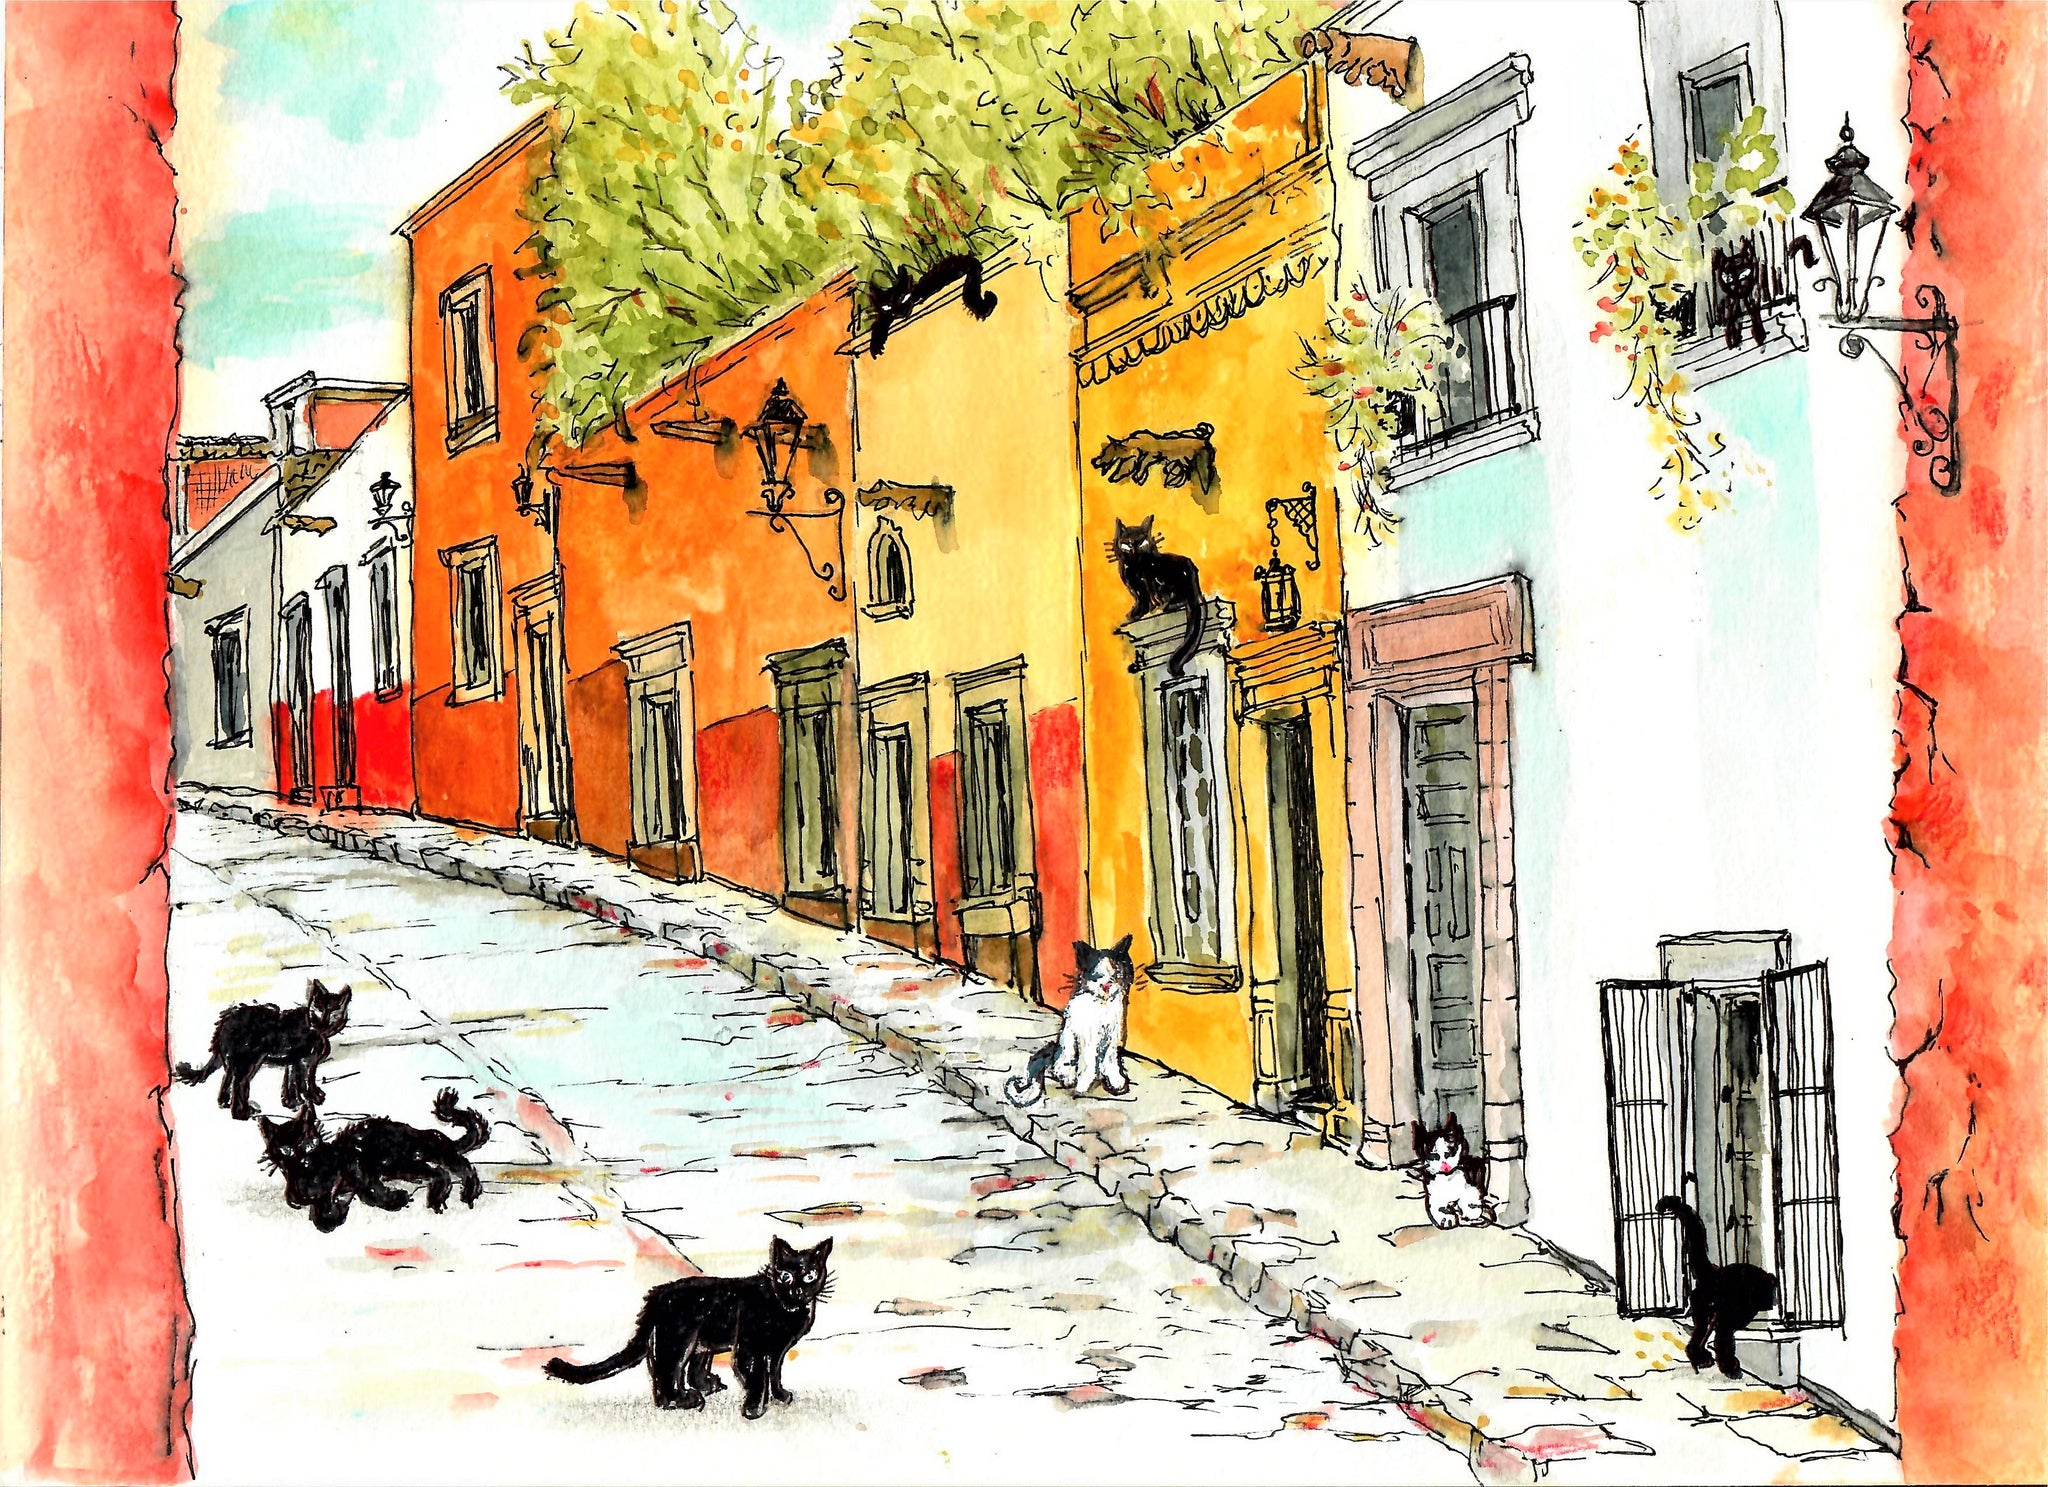 Cats In An Alley, Cats In A Colorful Hilly Stone Alley